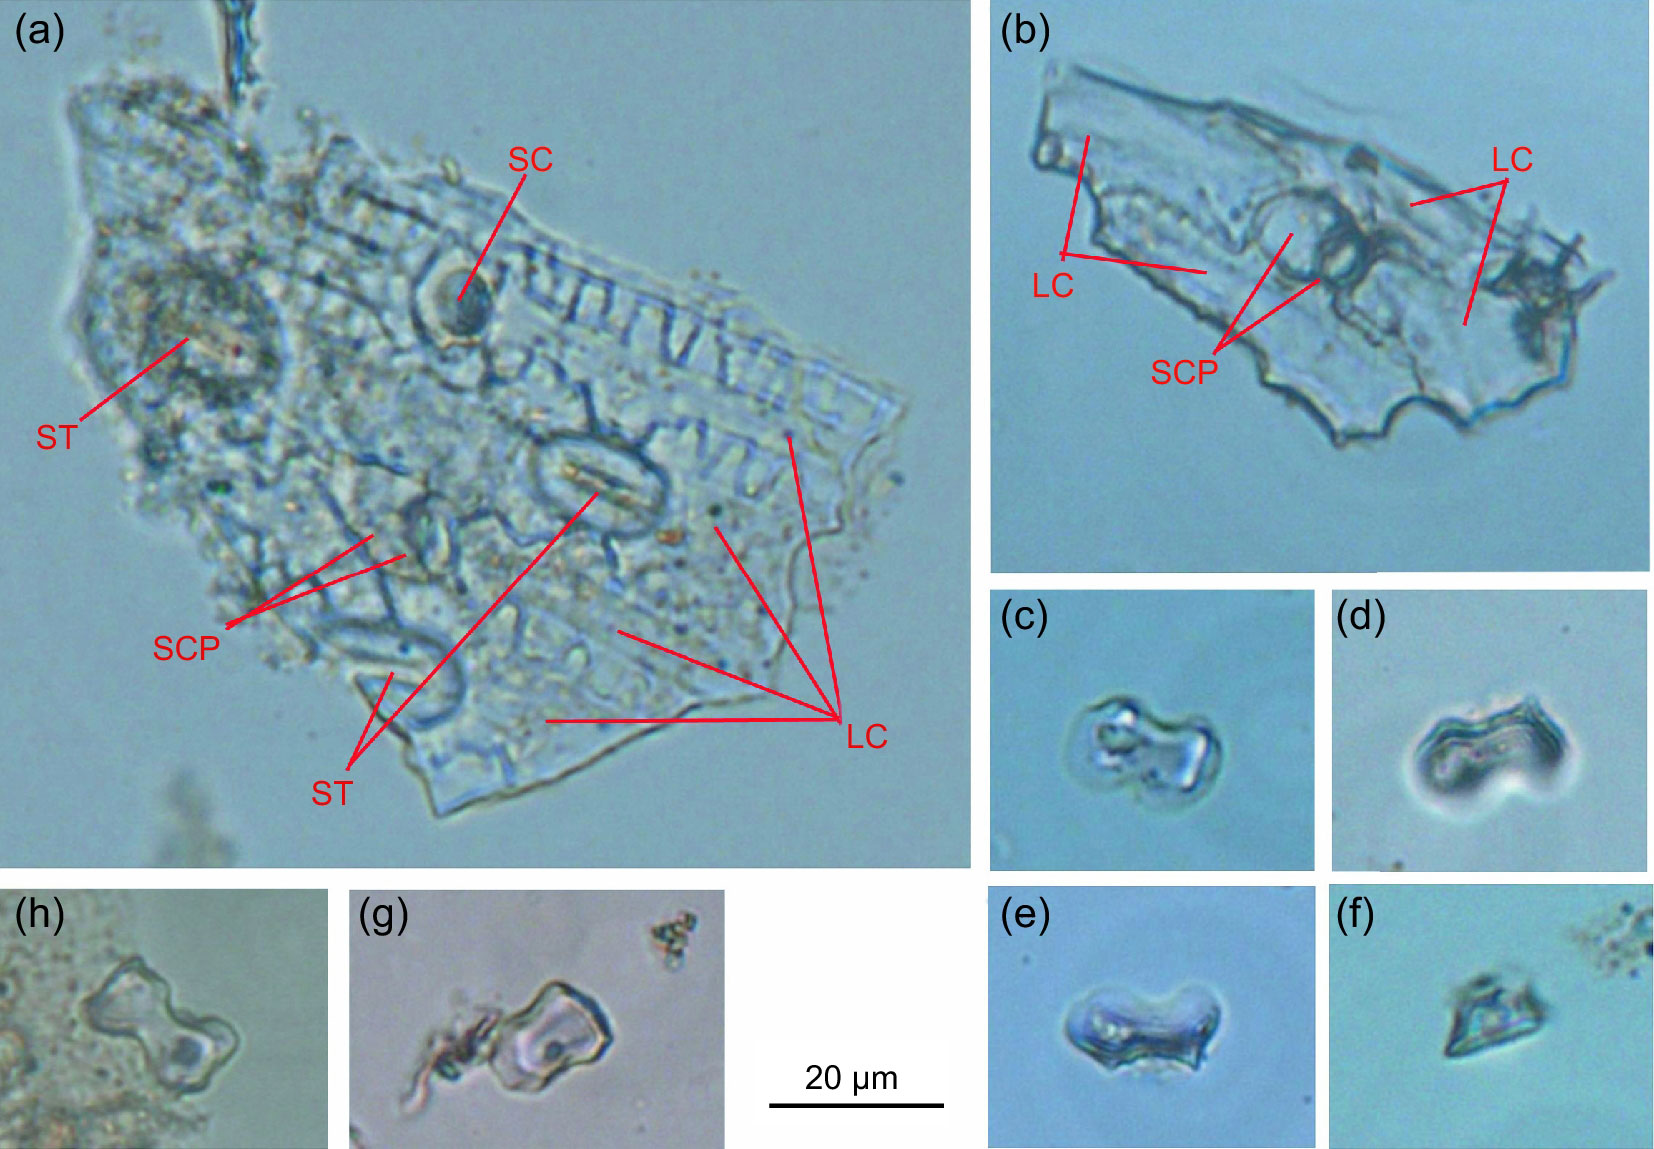 An 8-panel figure from a published paper showing photographs of epidermal fragments  and isolated phytoliths from a hadrosaur skull discovered in the Early Cretaceous of China. The two upper panels show epidermal fragments with cell types labeled, including long cells, short cells, and stomata. The remaining six panels show isolated phytoliths of various shapes, including dumbbell or bilobed and rondel.